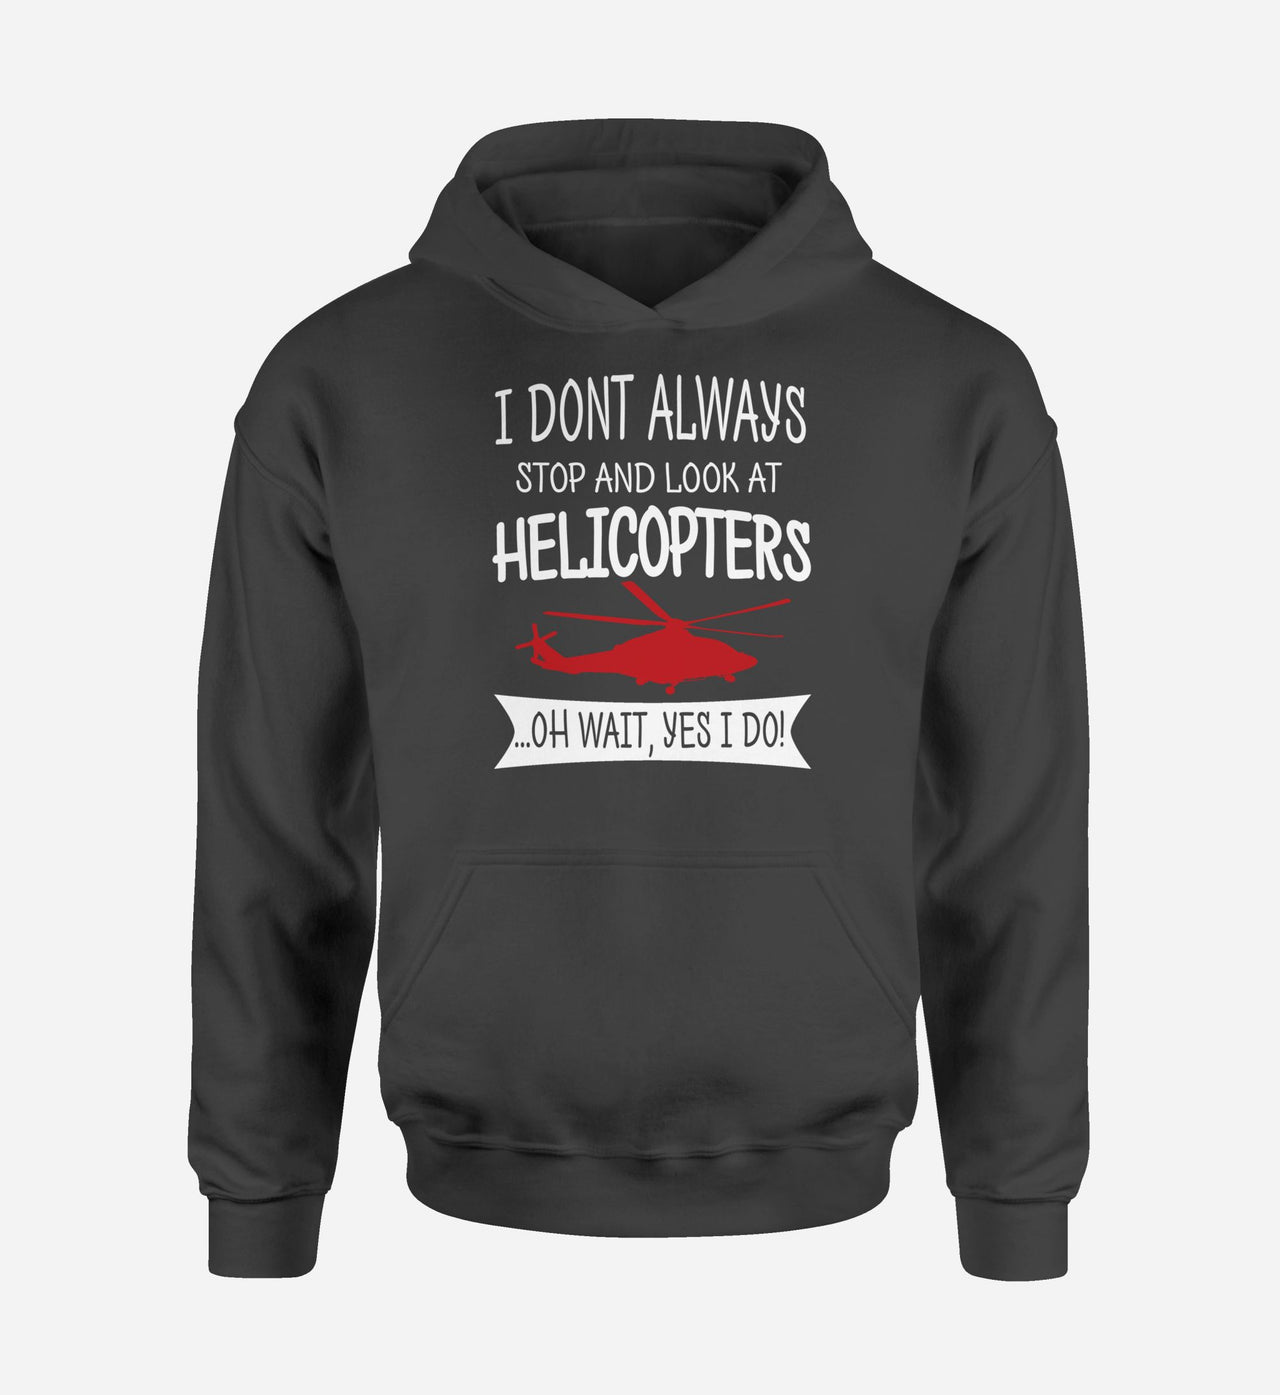 I Don't Always Stop and Look at Helicopters Designed Hoodies